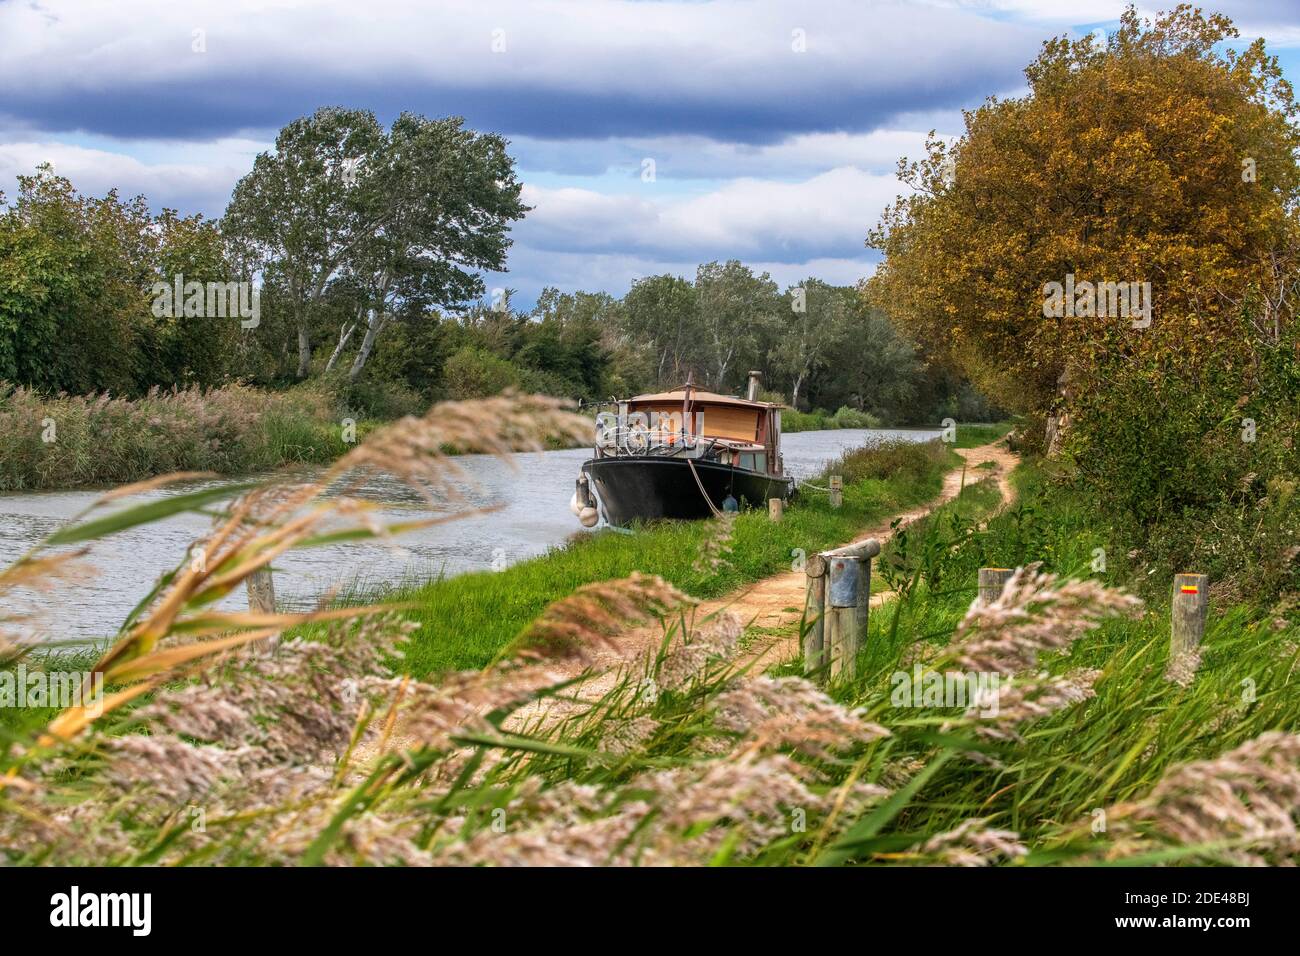 The Canal du Midi, near Carcassonne, French department of Aude, Occitanie Region, Languedoc-Rousillon France. Boats moored on the tree lined canal. Stock Photo